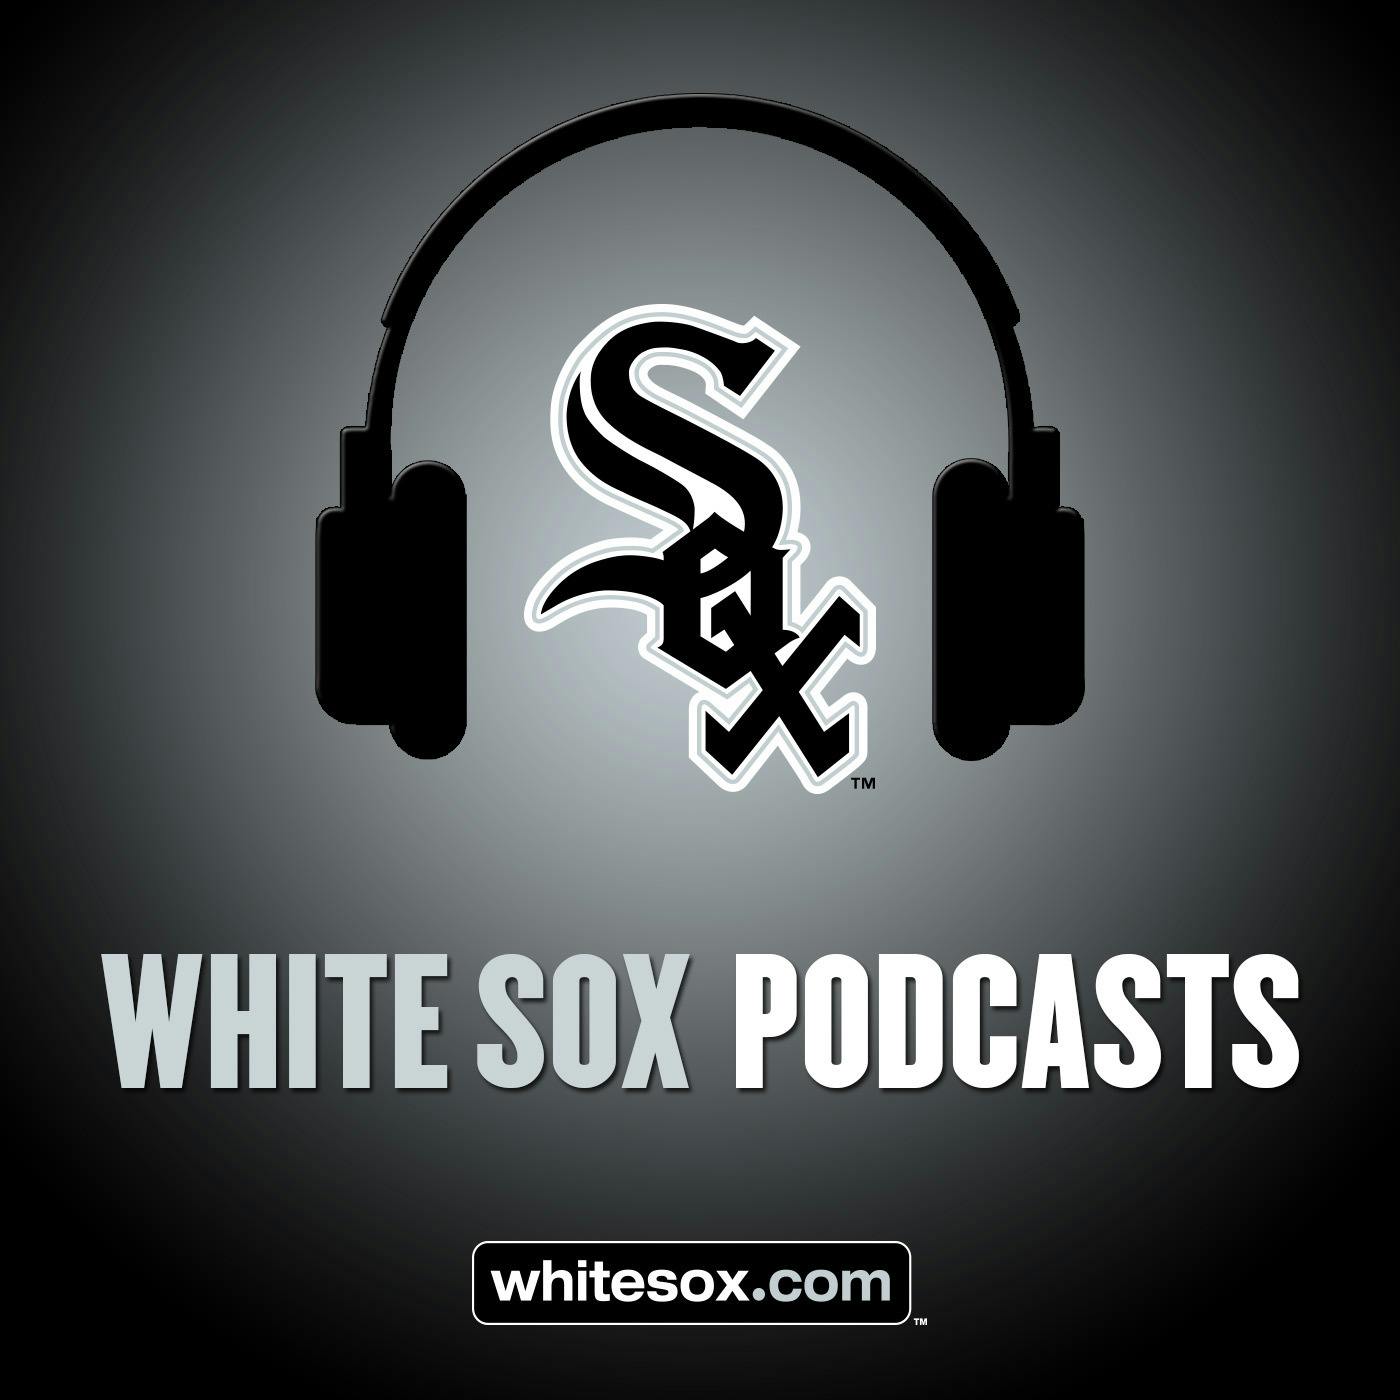 9/22/19: White Sox Weekly